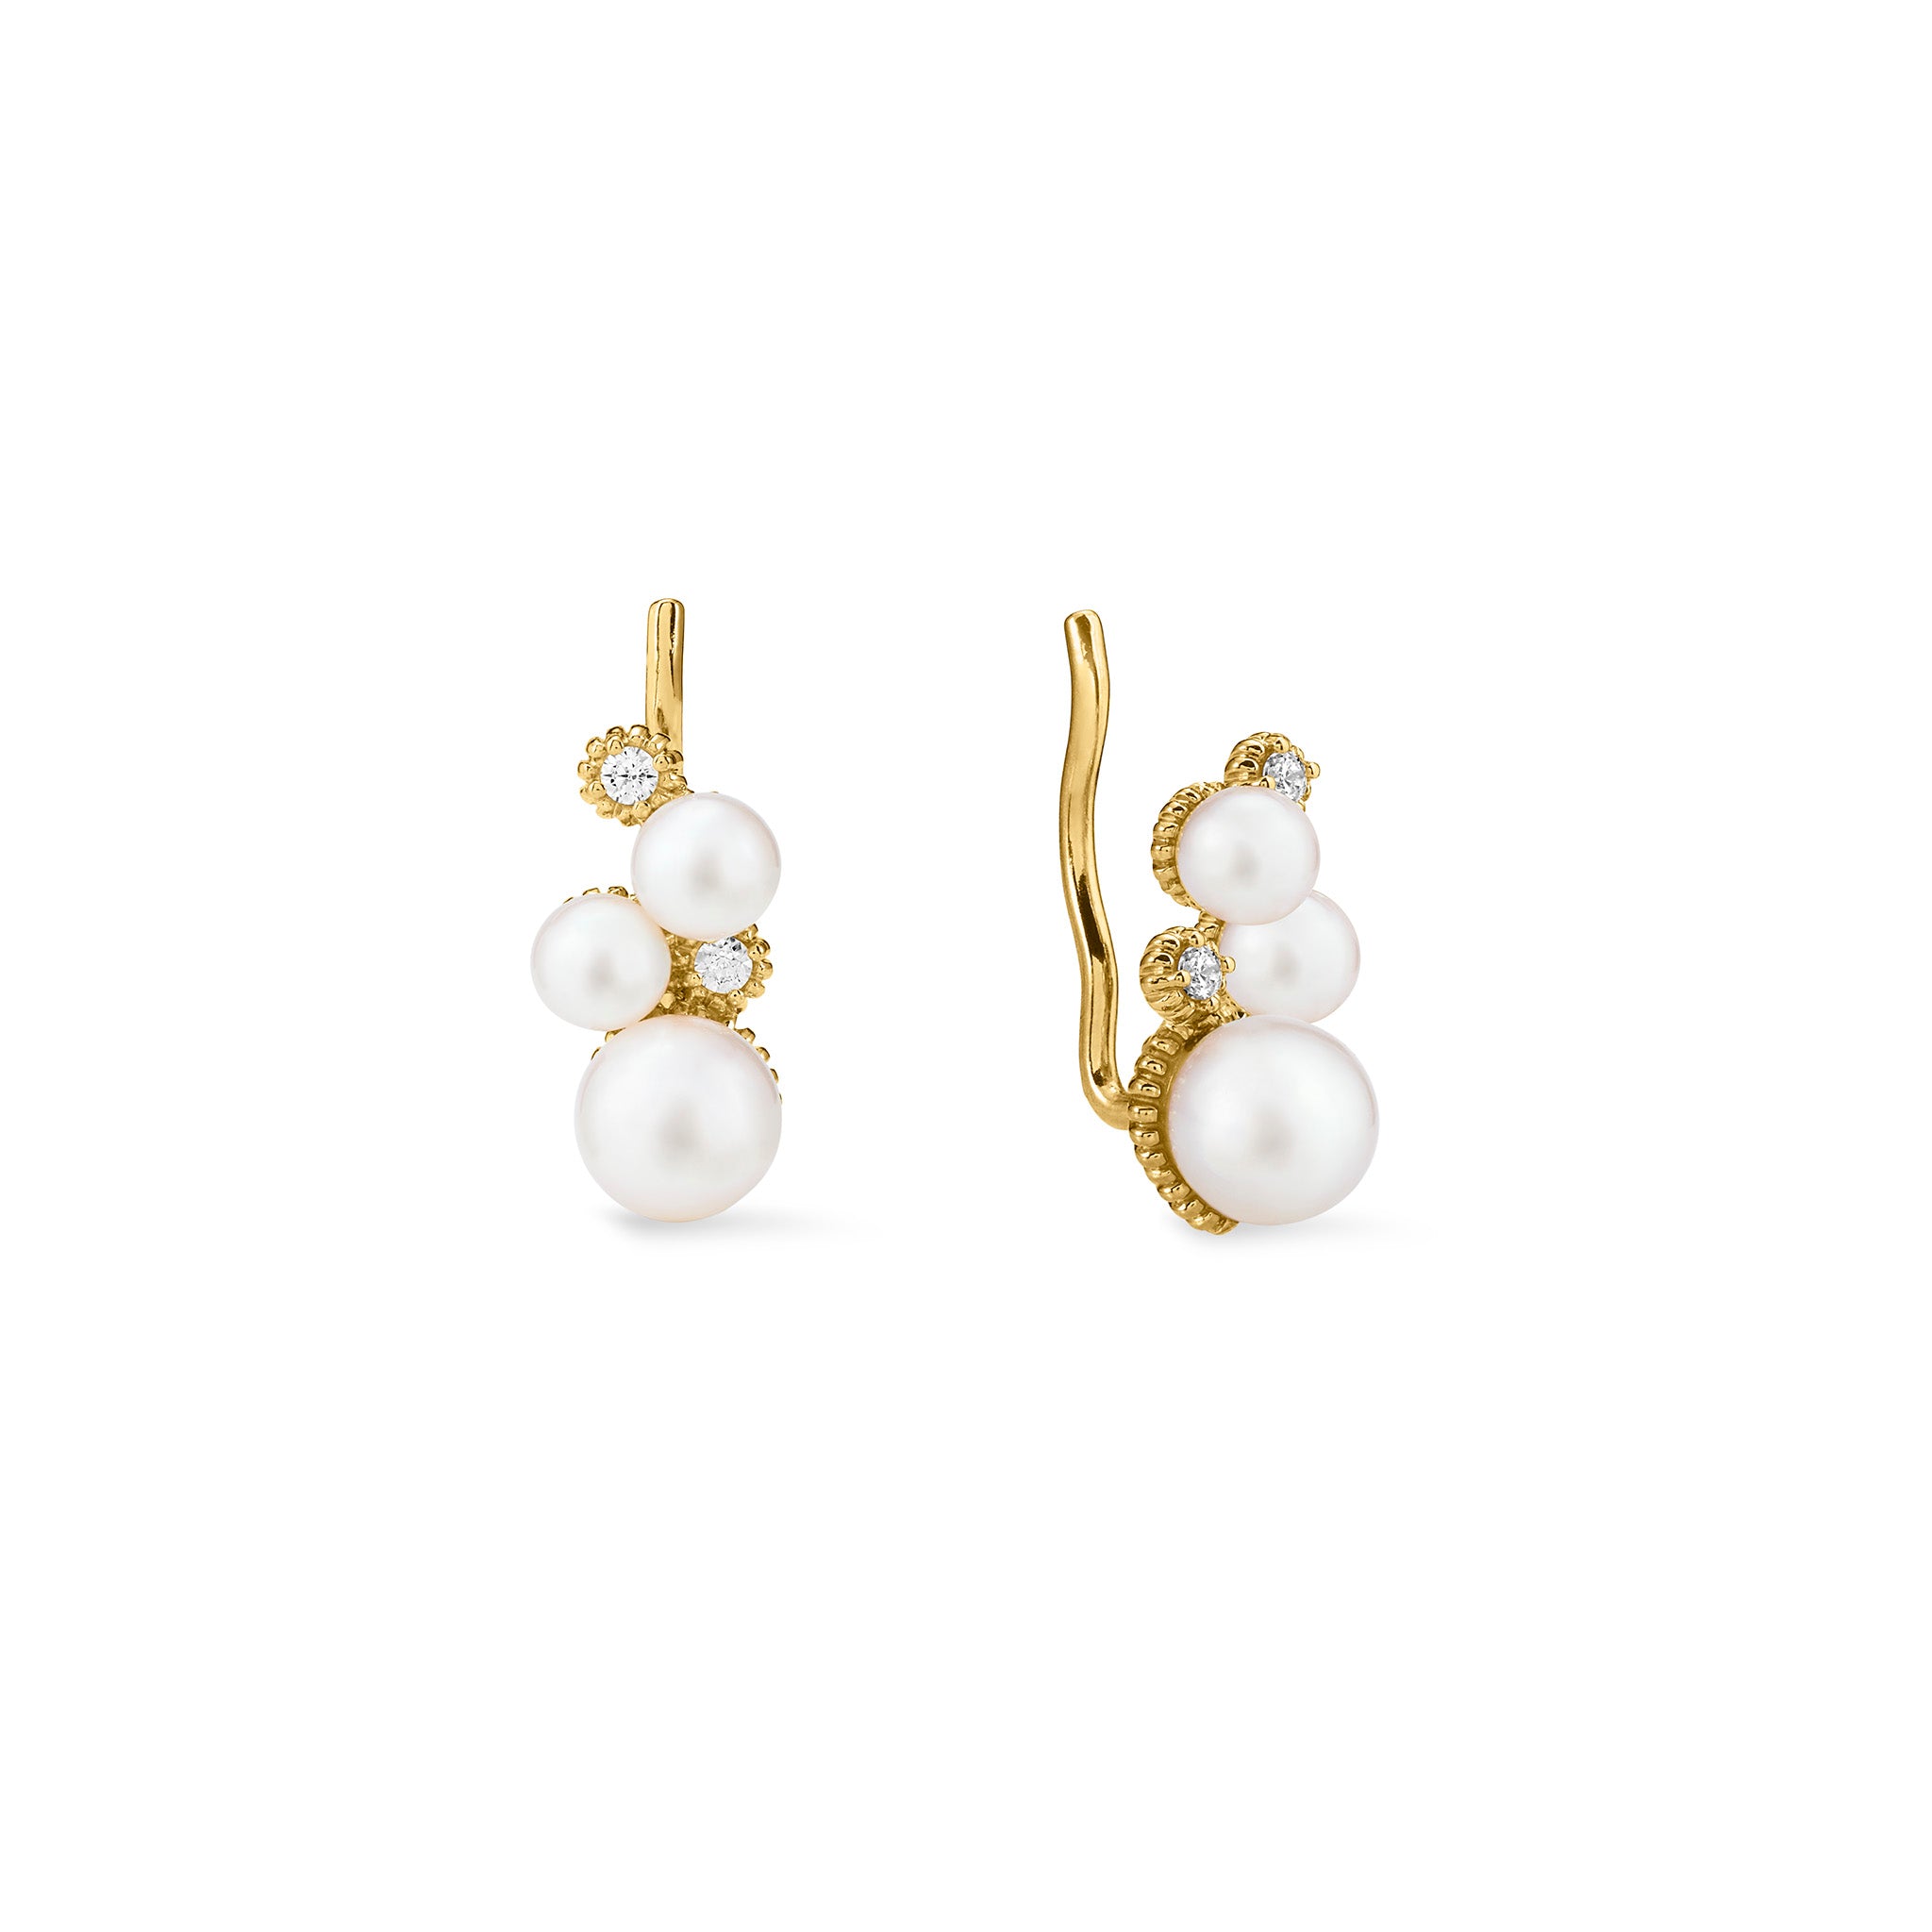 Shima Ear Climbers With Freshwater Pearls And Diamonds In 18K